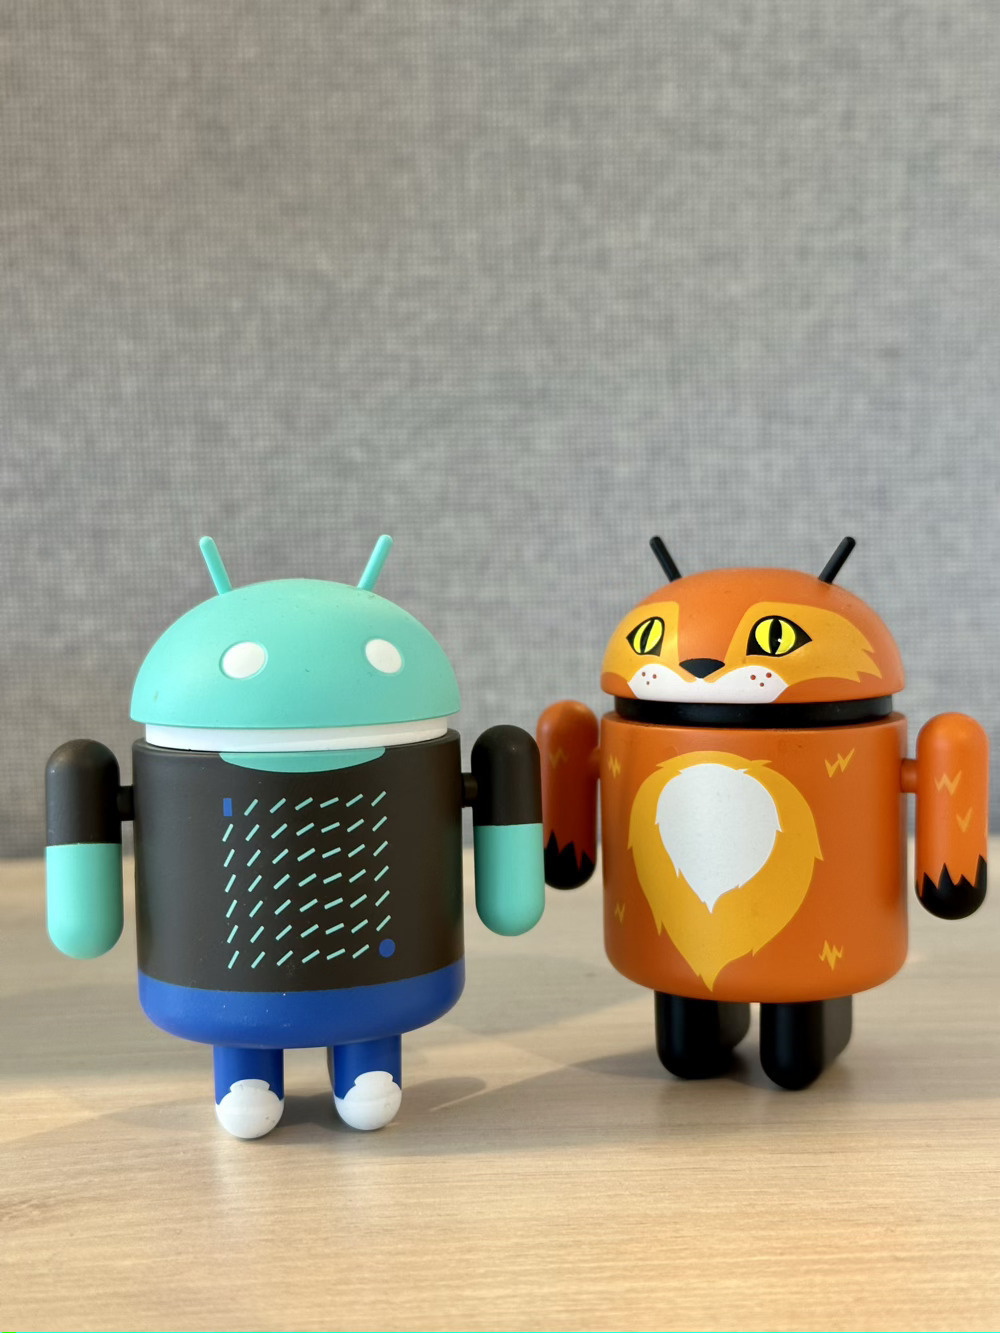 Photo of two little Android characters standing on a desk.